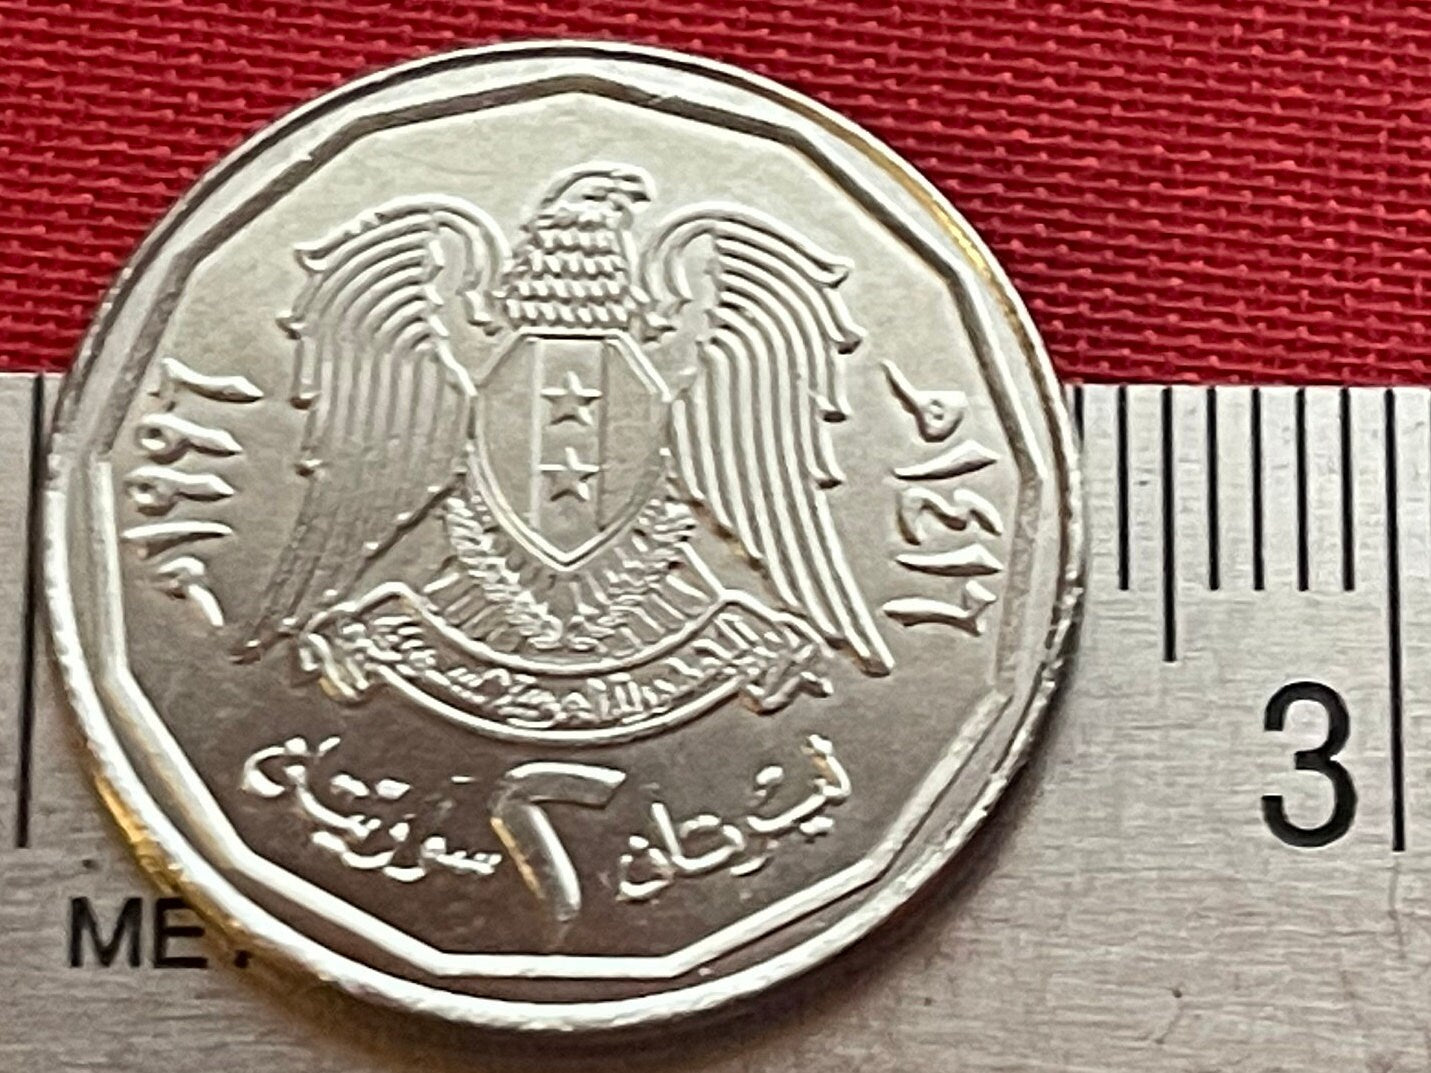 Roman Gladiator Theatre w/15,000 Seats at Bosra & Hawk of Quraish 2 Lira Syria Authentic Coin Charm for Jewelry and Craft Making